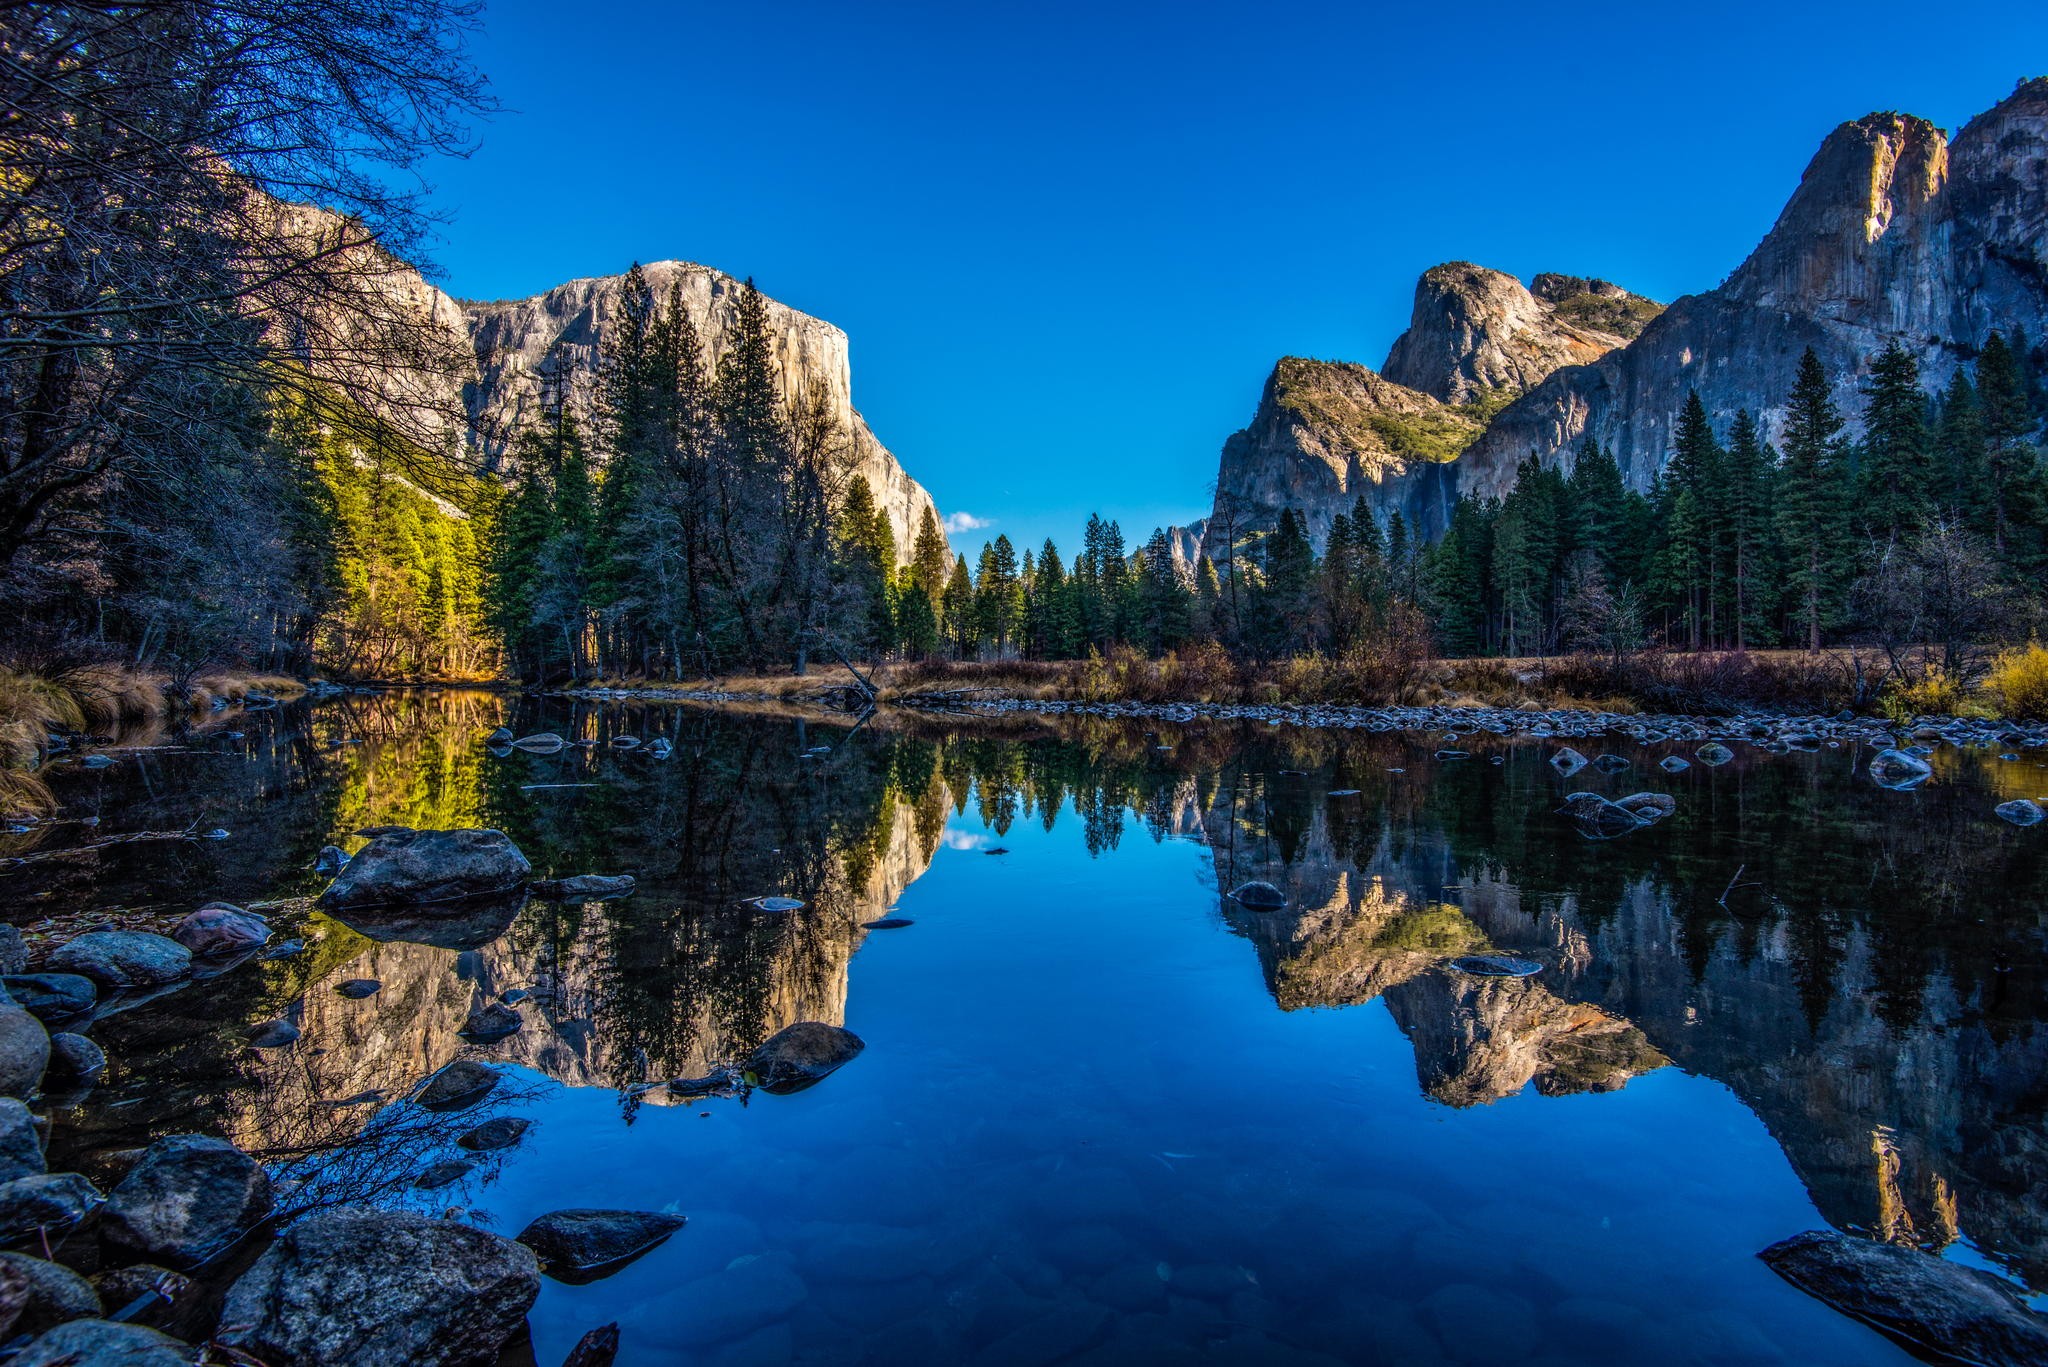 General 2048x1367 river Yosemite National Park nature landscape reflection cliff forest mountains water blue USA California